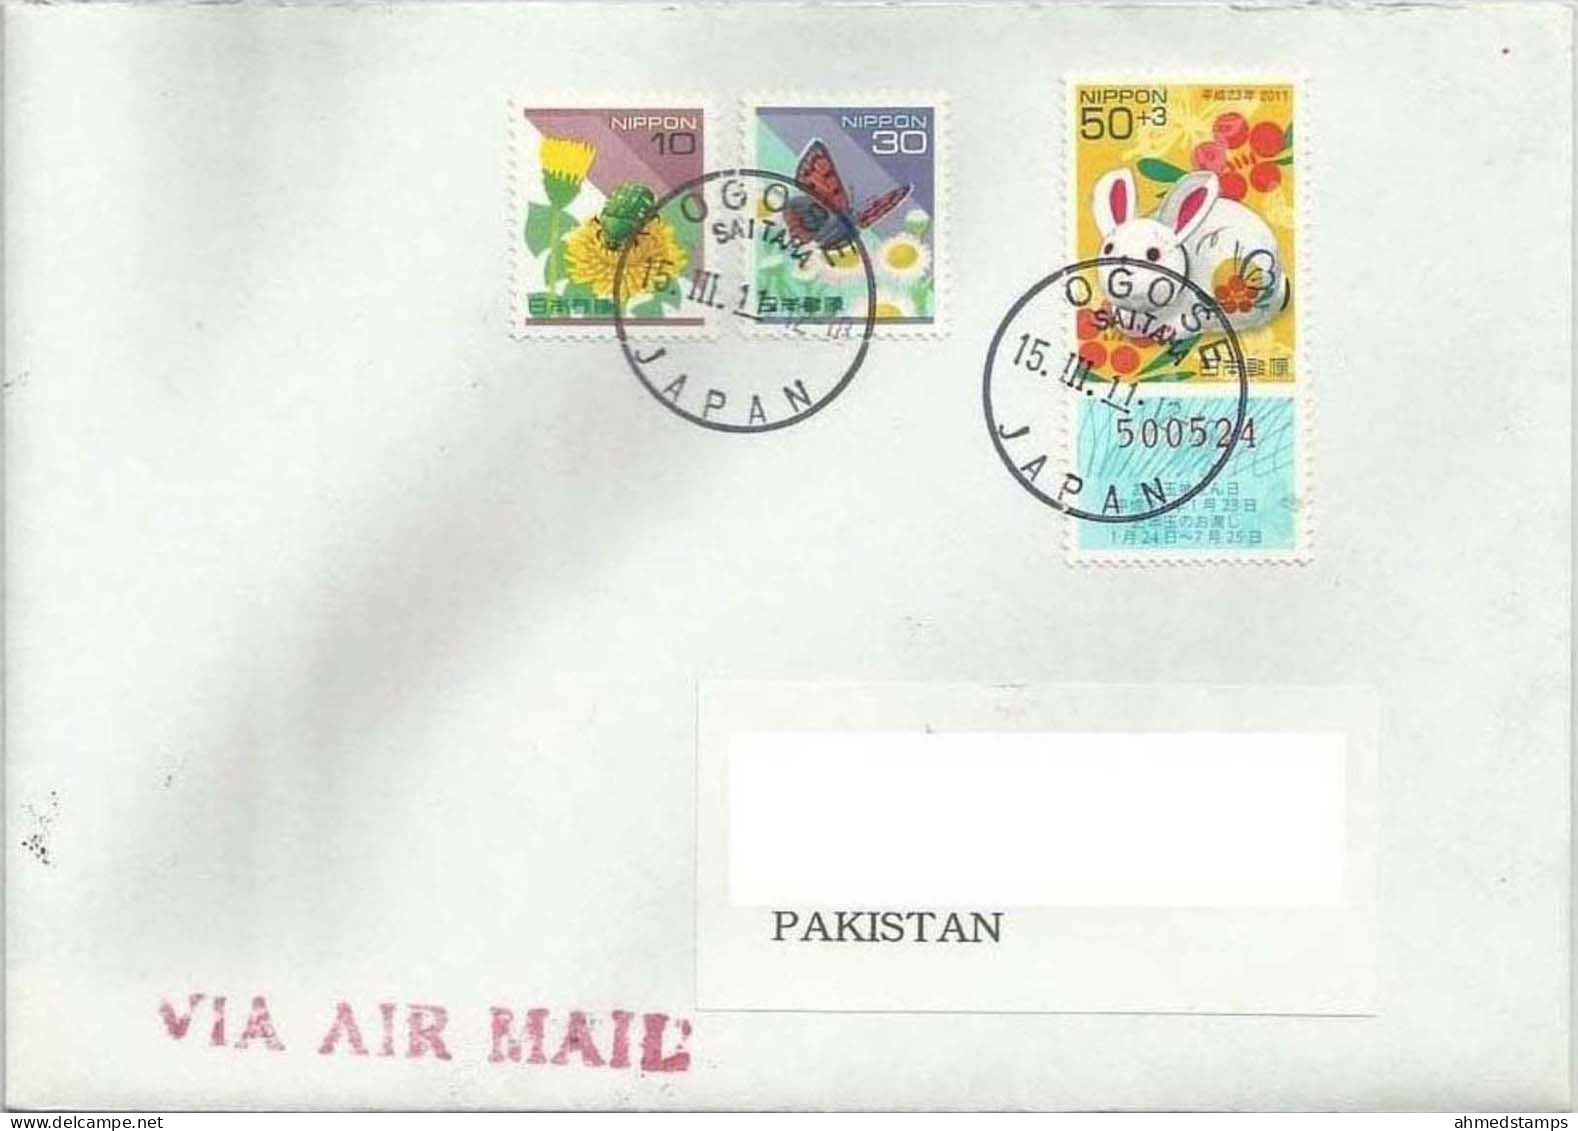 JAPAN POSTAL USED COVER AIRMAIL TO PAKISTAN BUTTERFLY FLOWERS RABBIT ANIMAL ANIMALS - Luchtpost